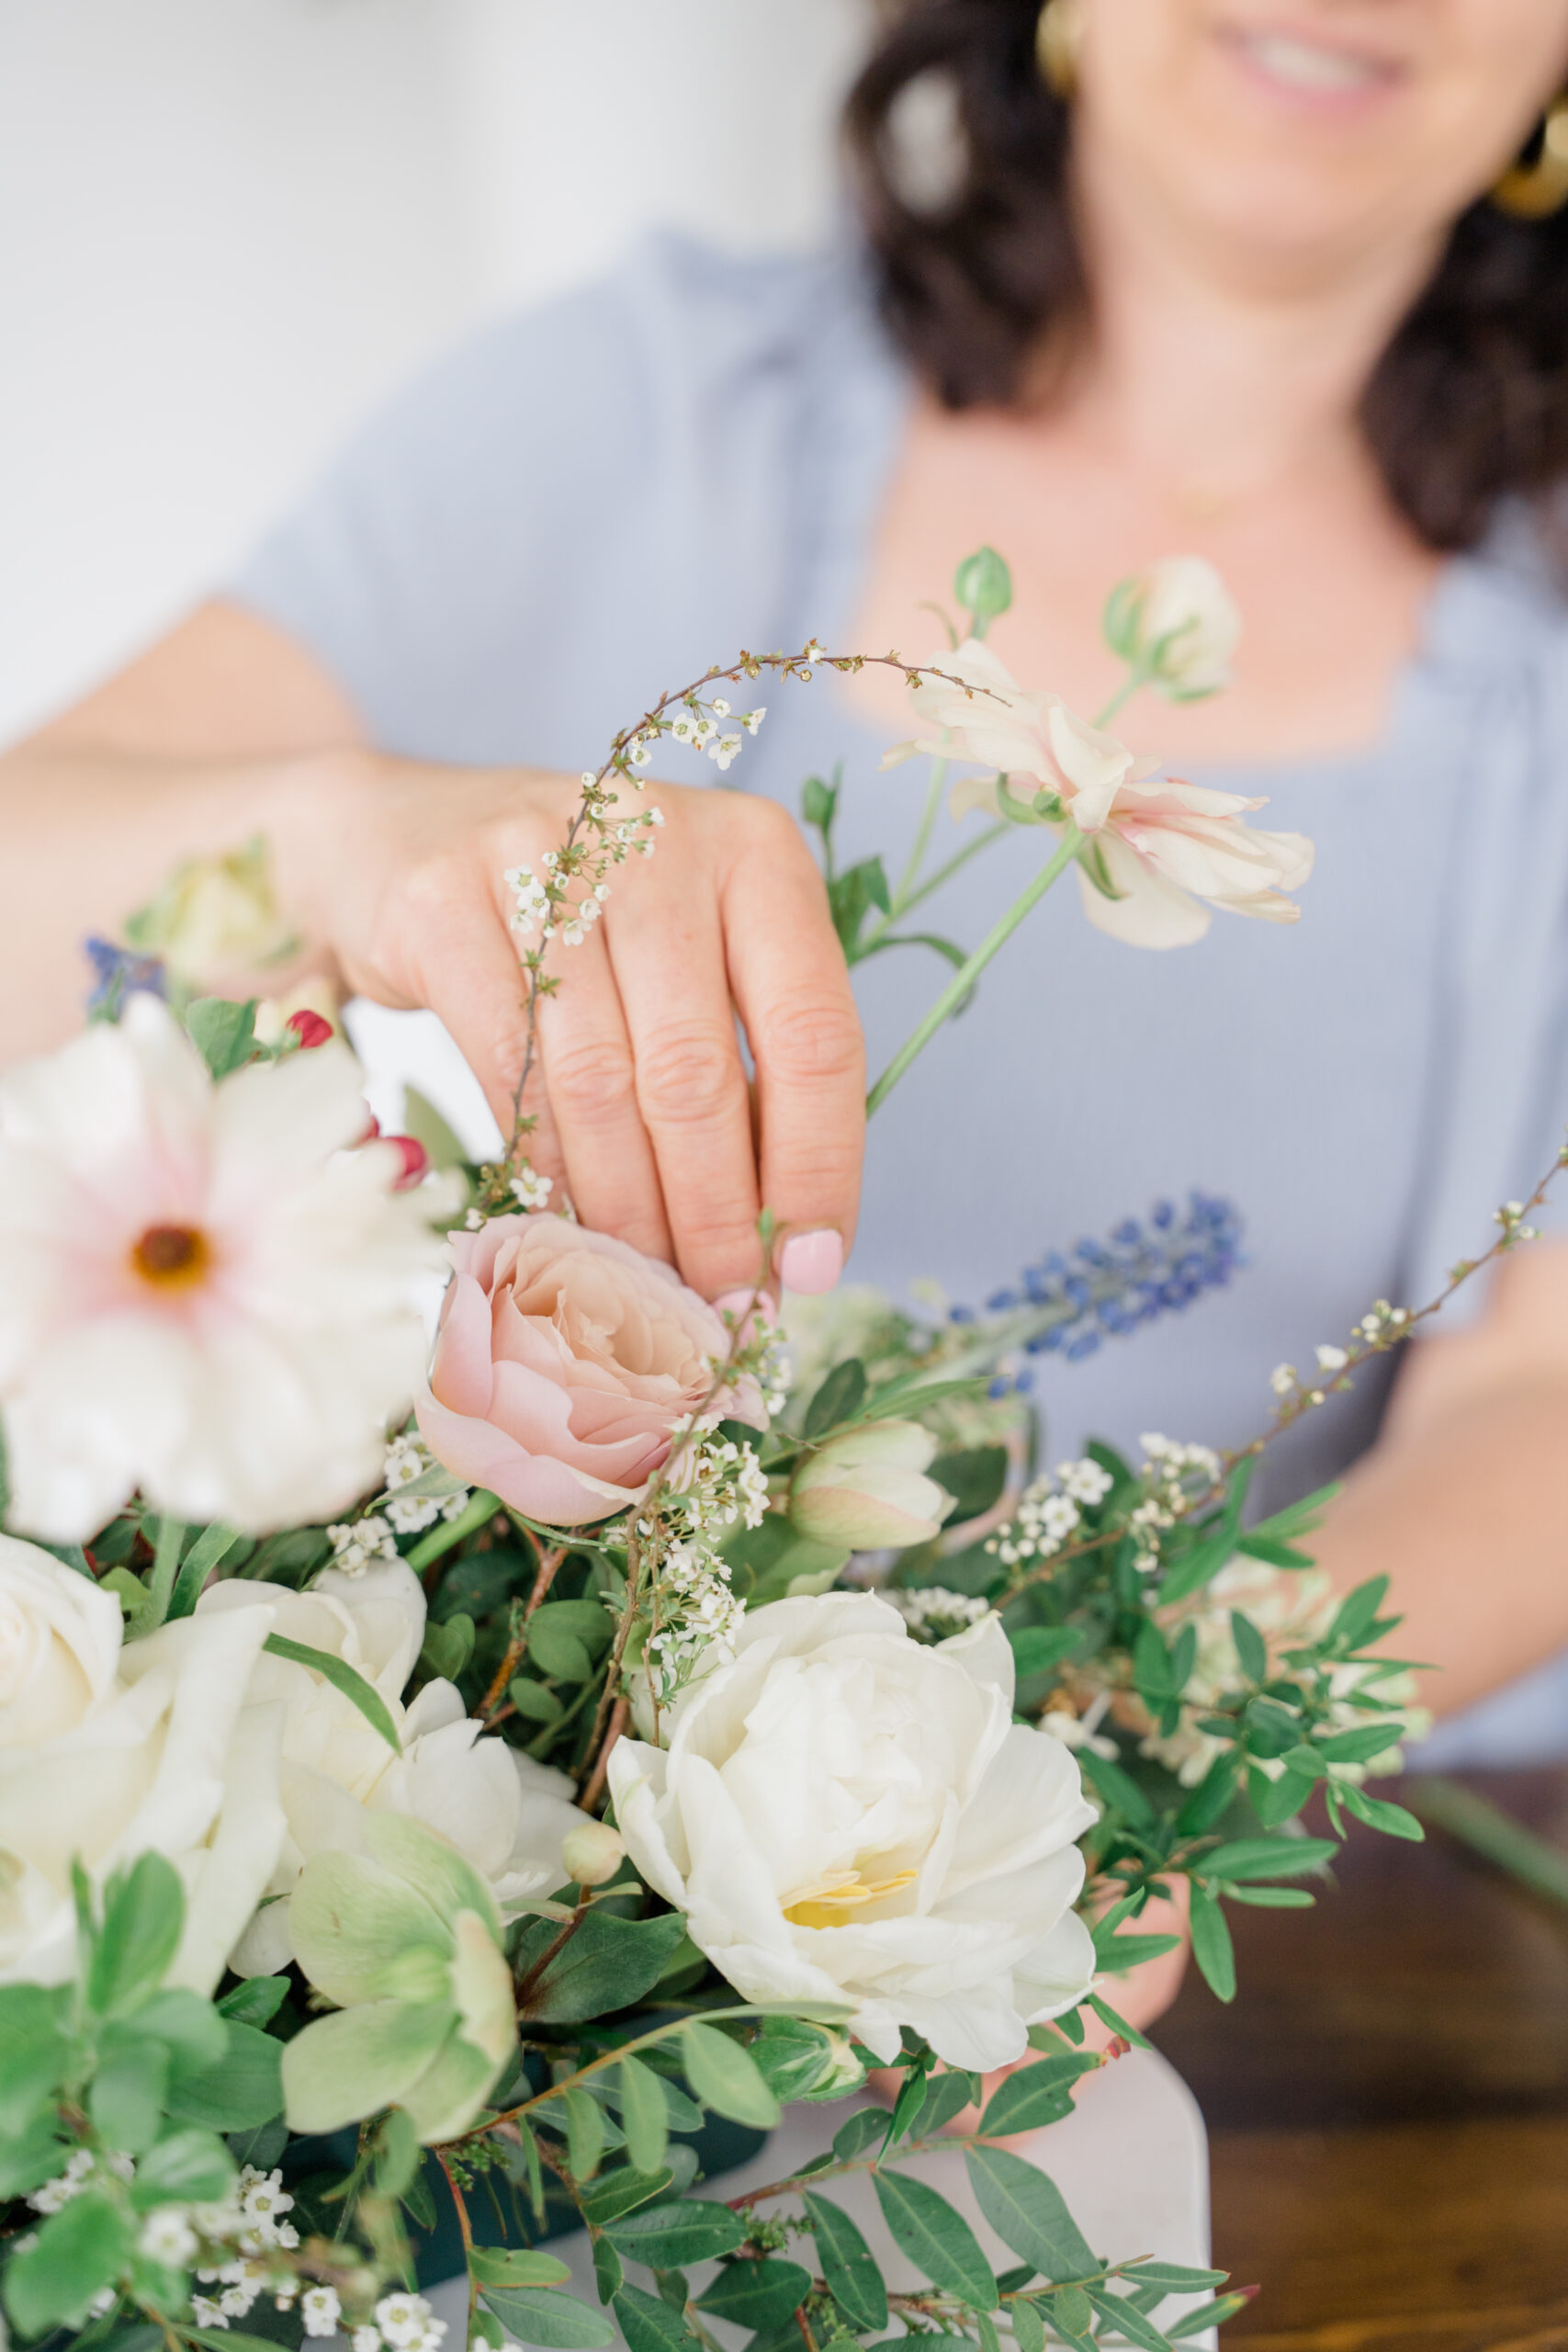 featColumbus photographer captures candid brand image of a woman arranging flowers